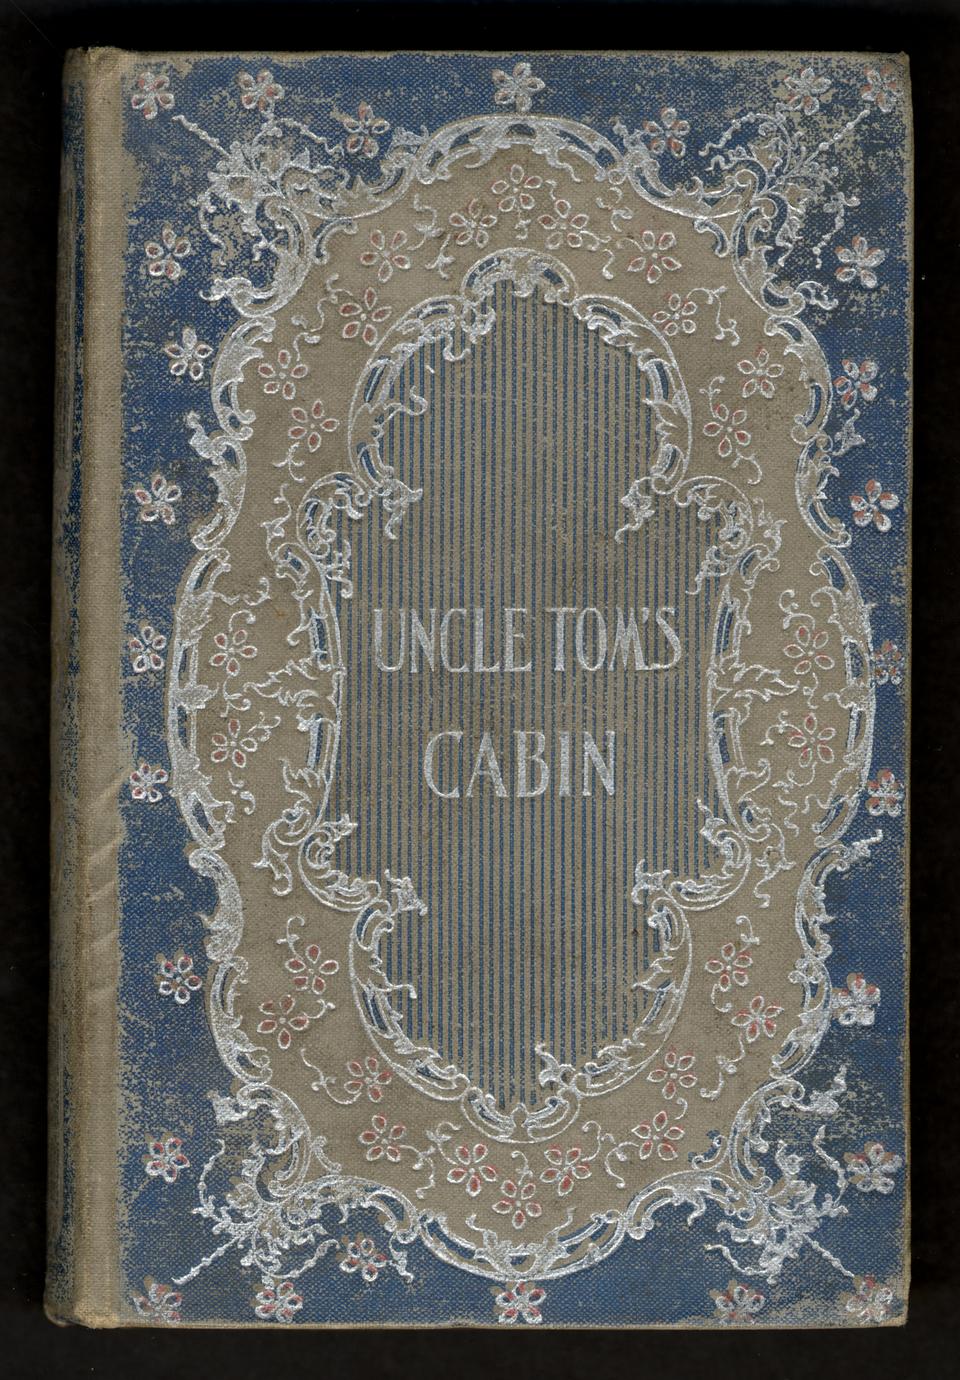 Uncle Tom's cabin (1 of 2)